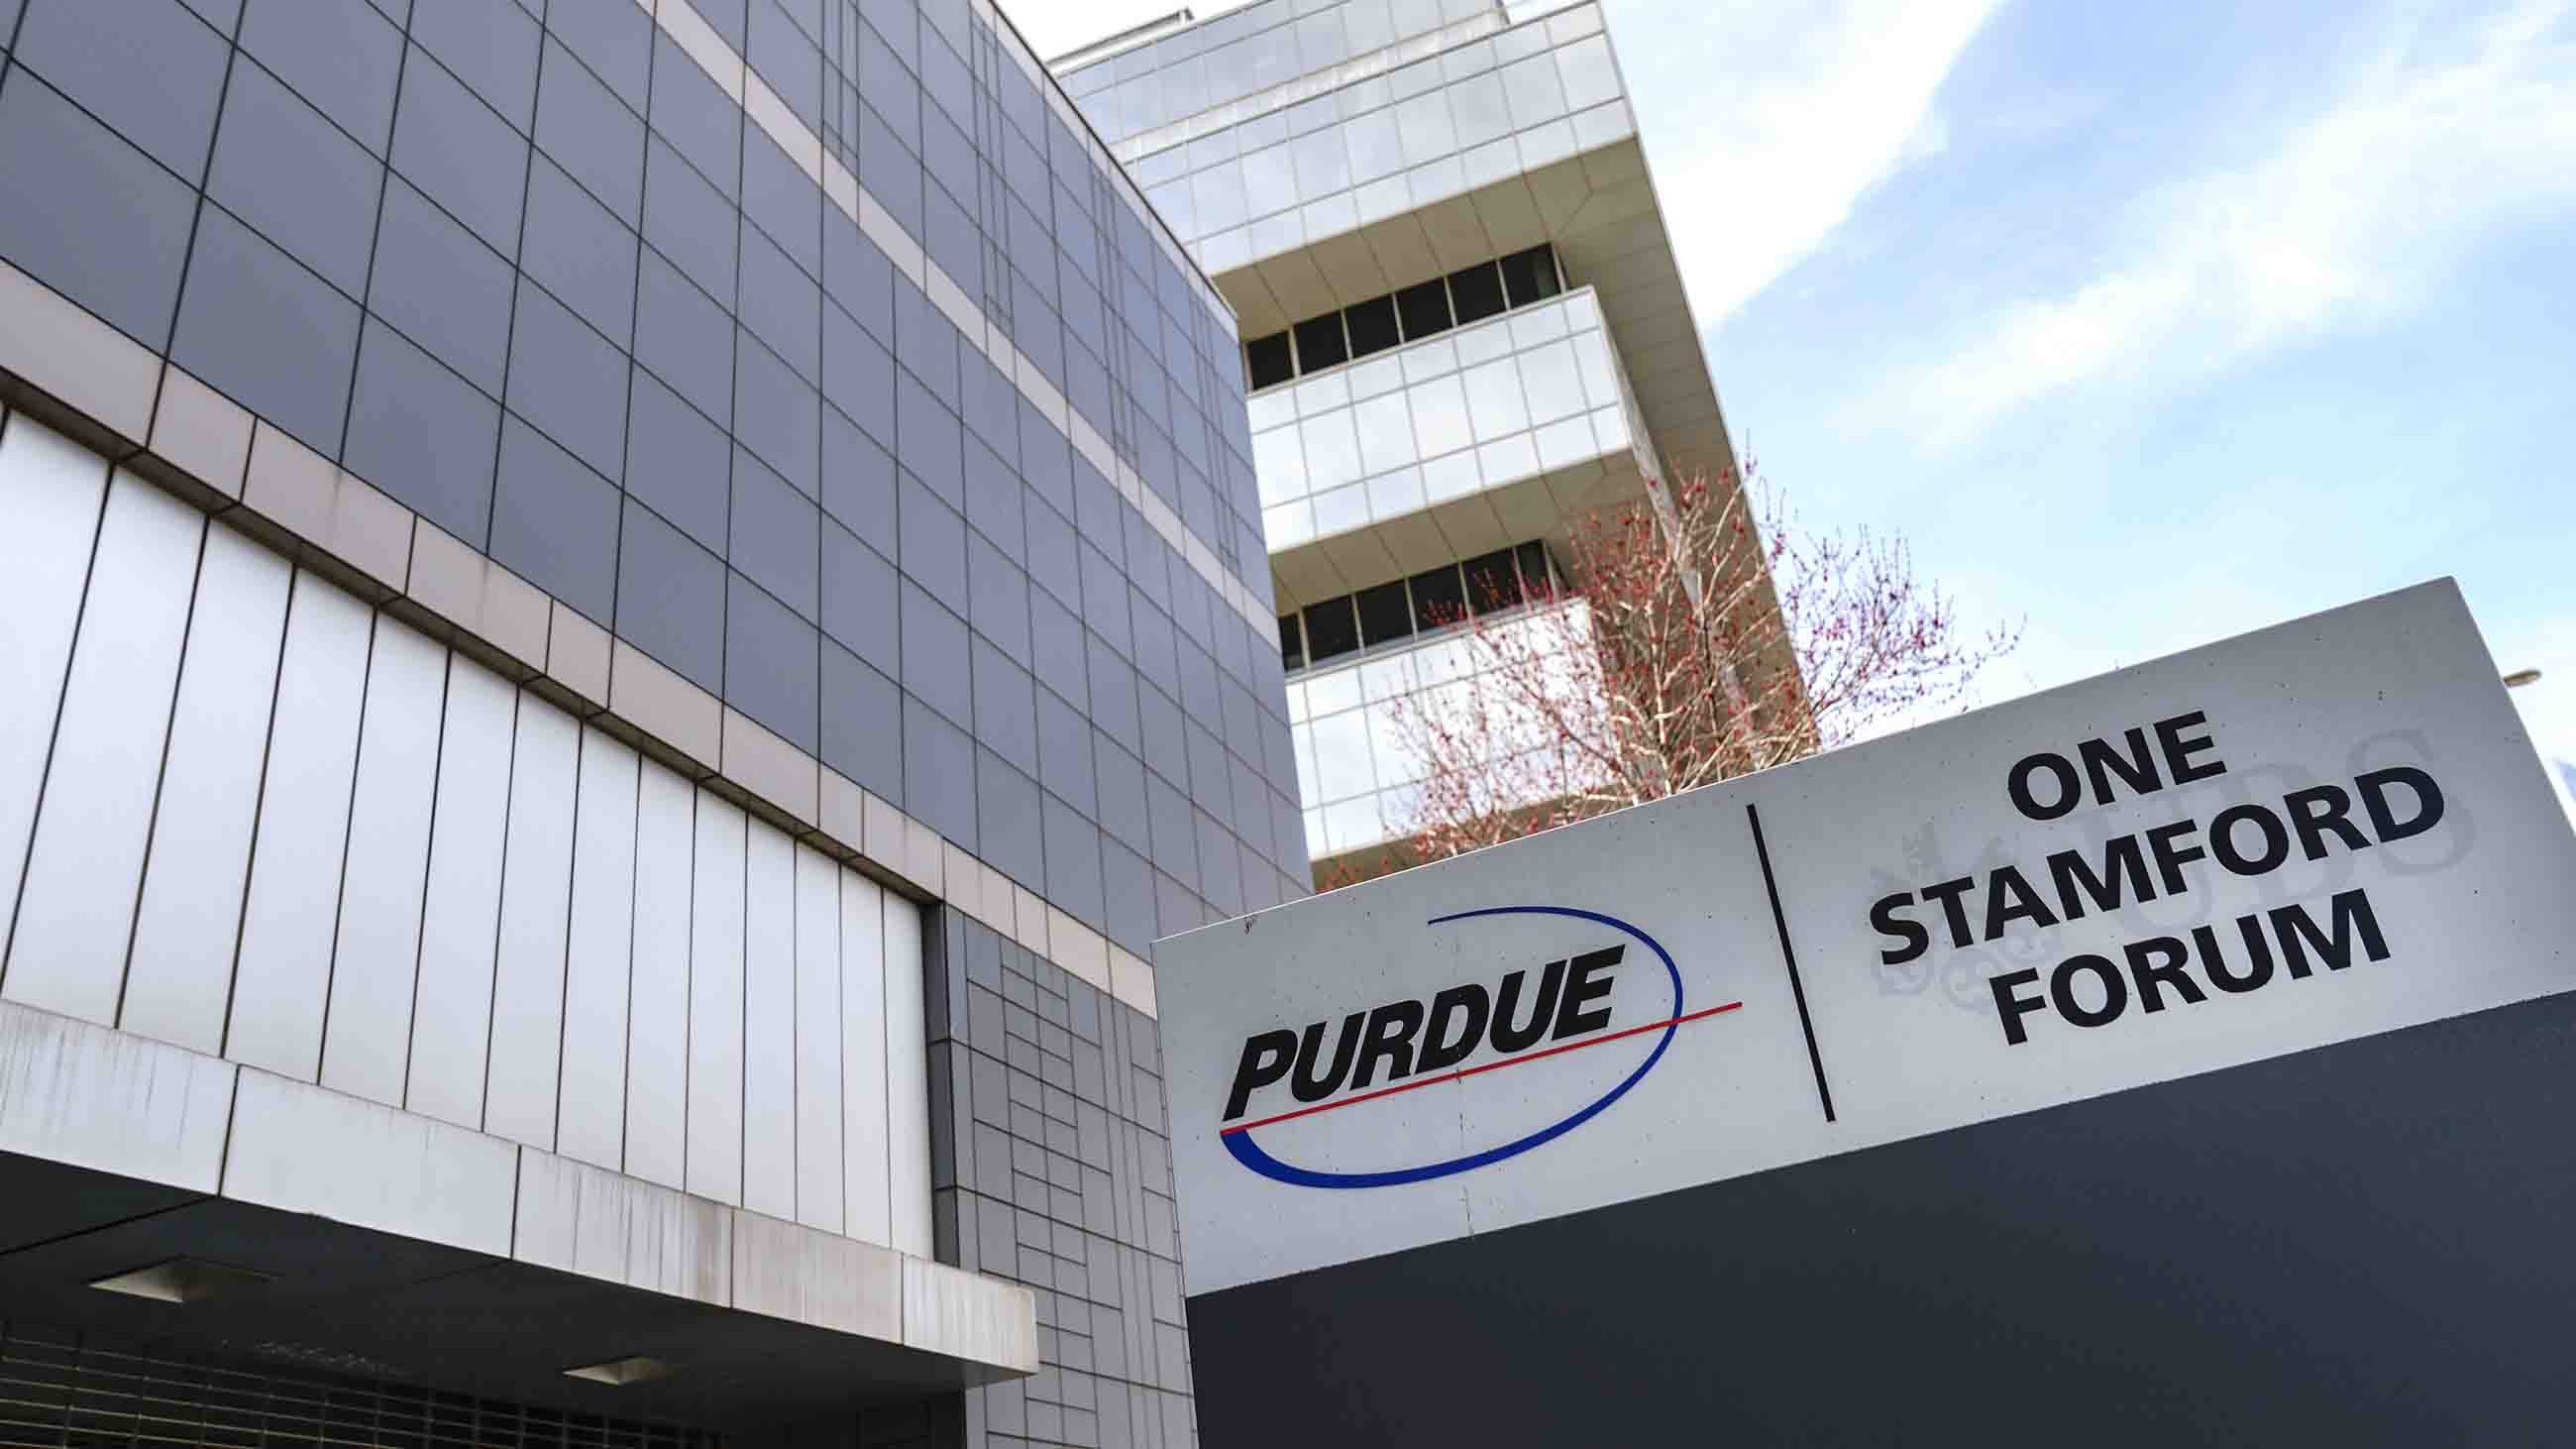 Purdue Pharma, the maker of the opioid painkiller Oxycontin, is facing hundreds of lawsuits across the United States.